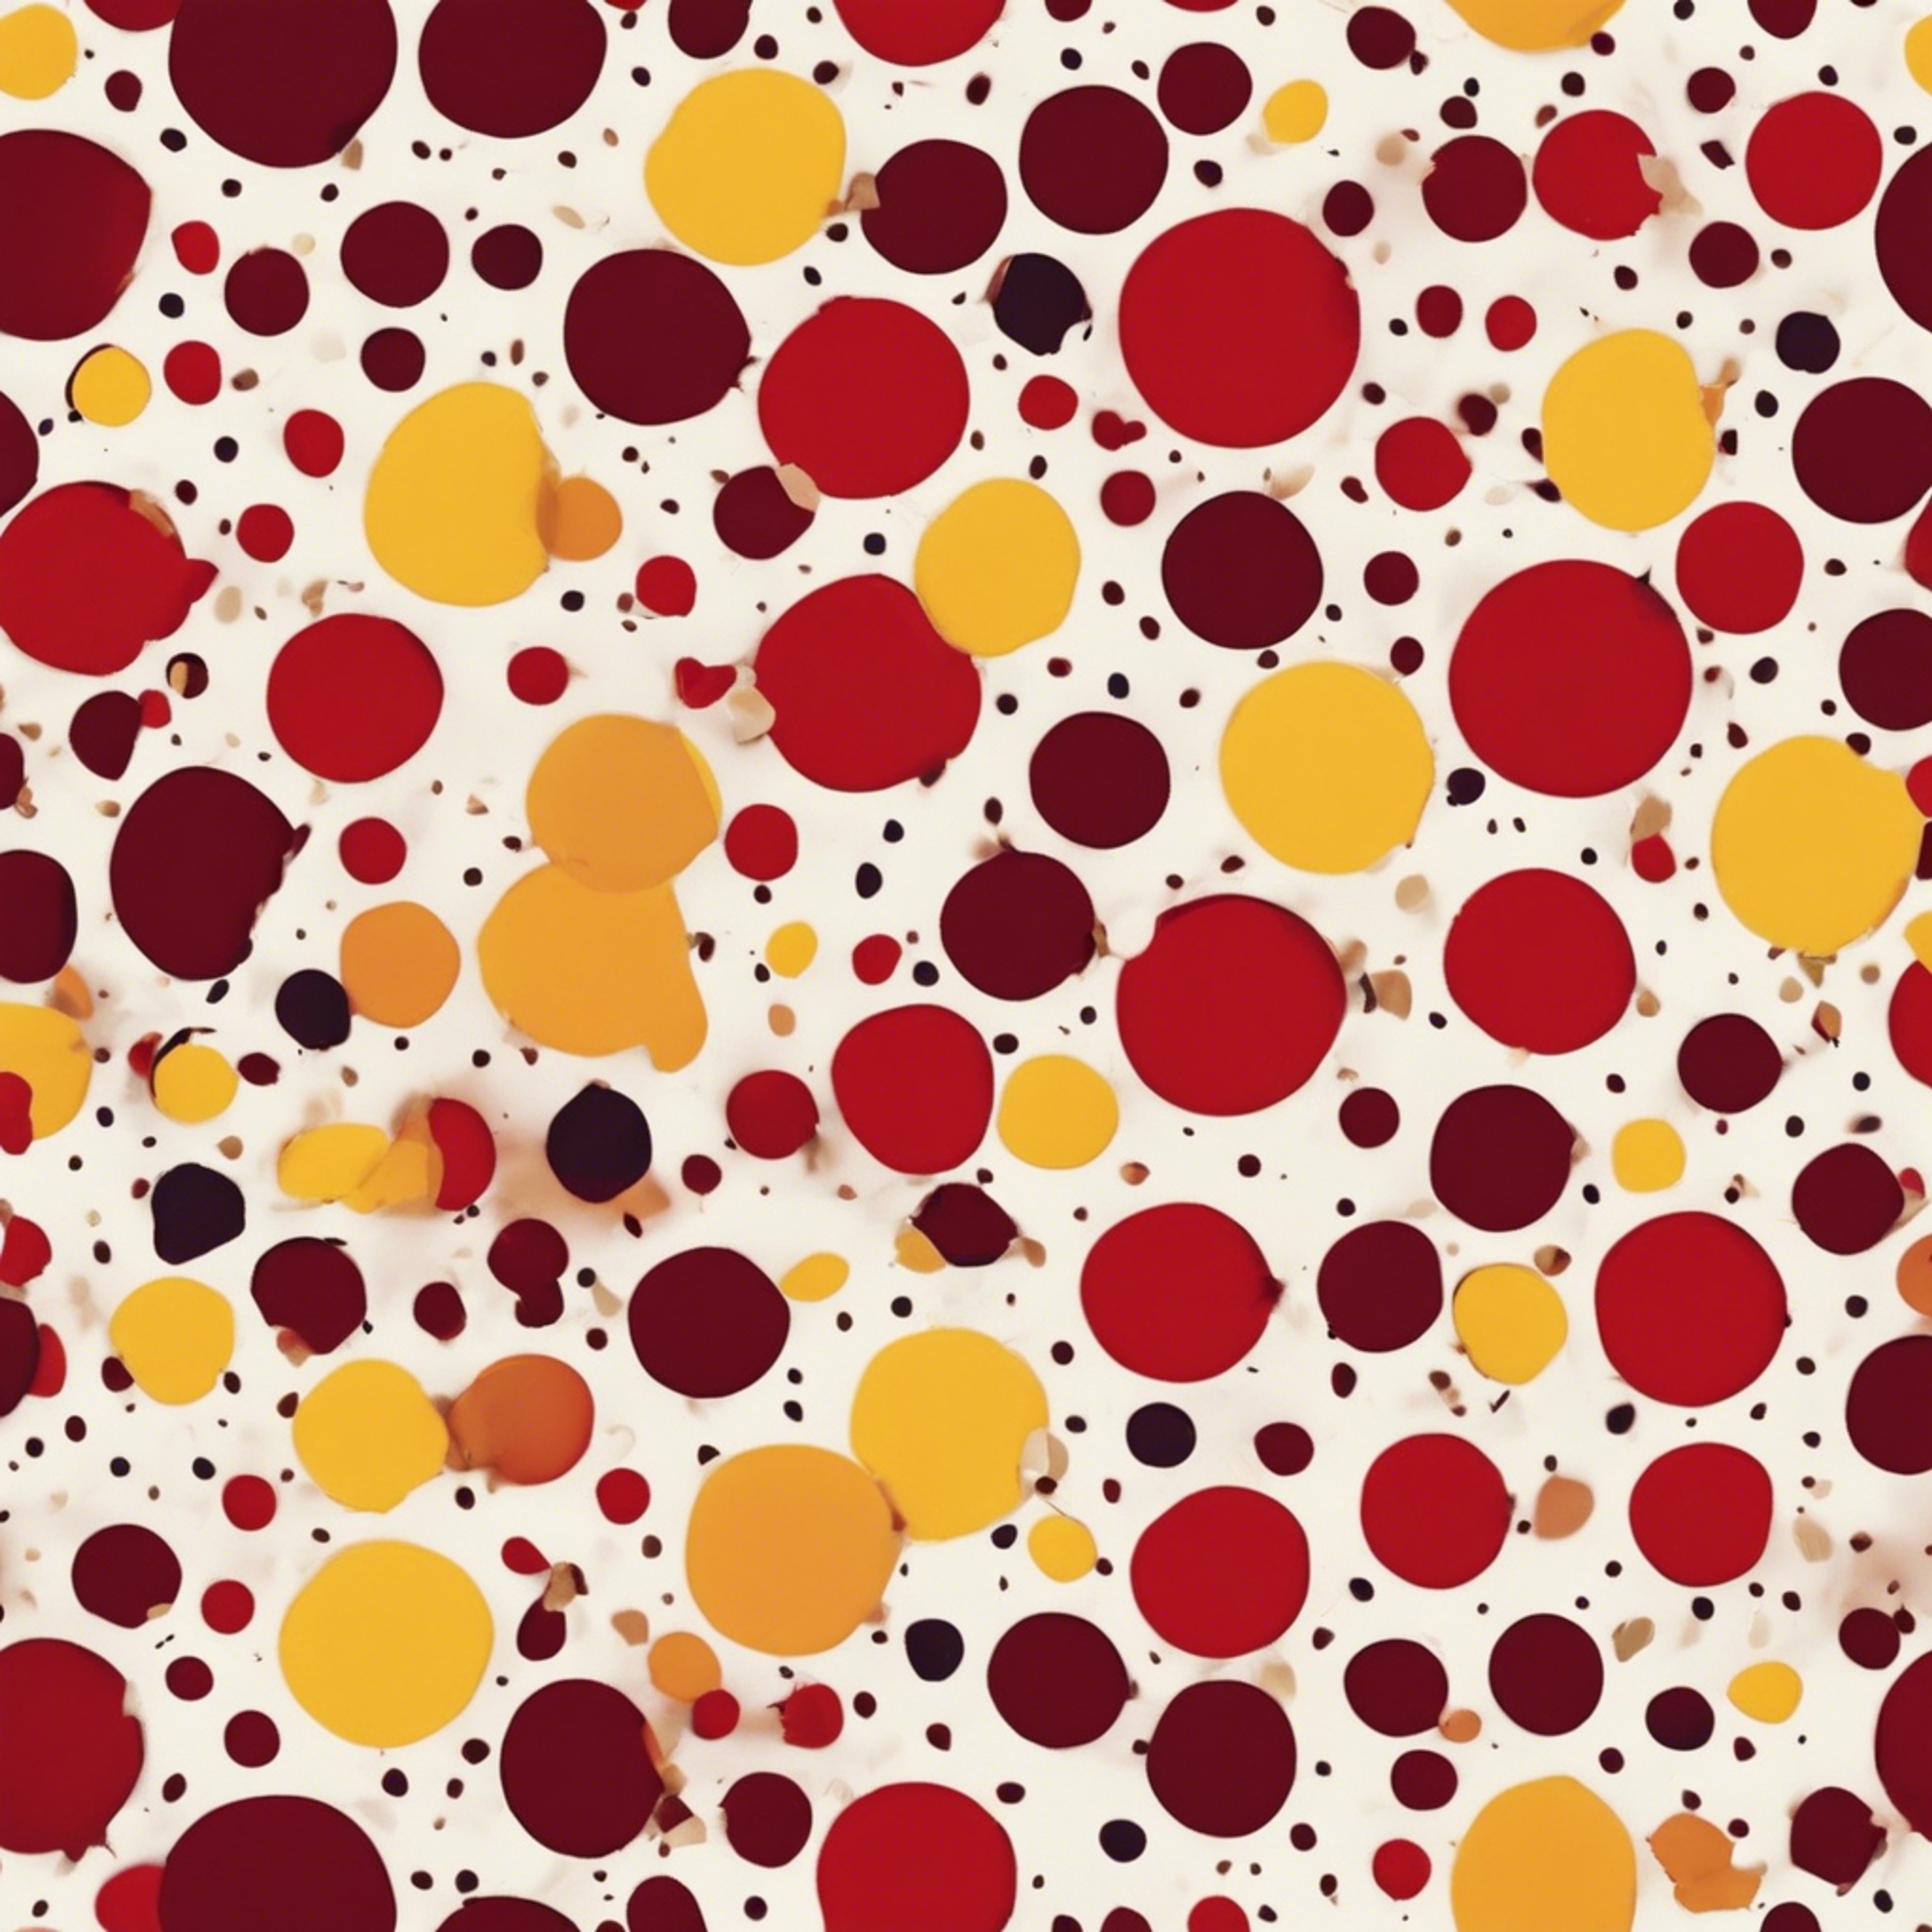 A delightful festival of red and yellow polka dots in a seamless pattern.壁紙[ddf68fdc8b8a4e2294f0]